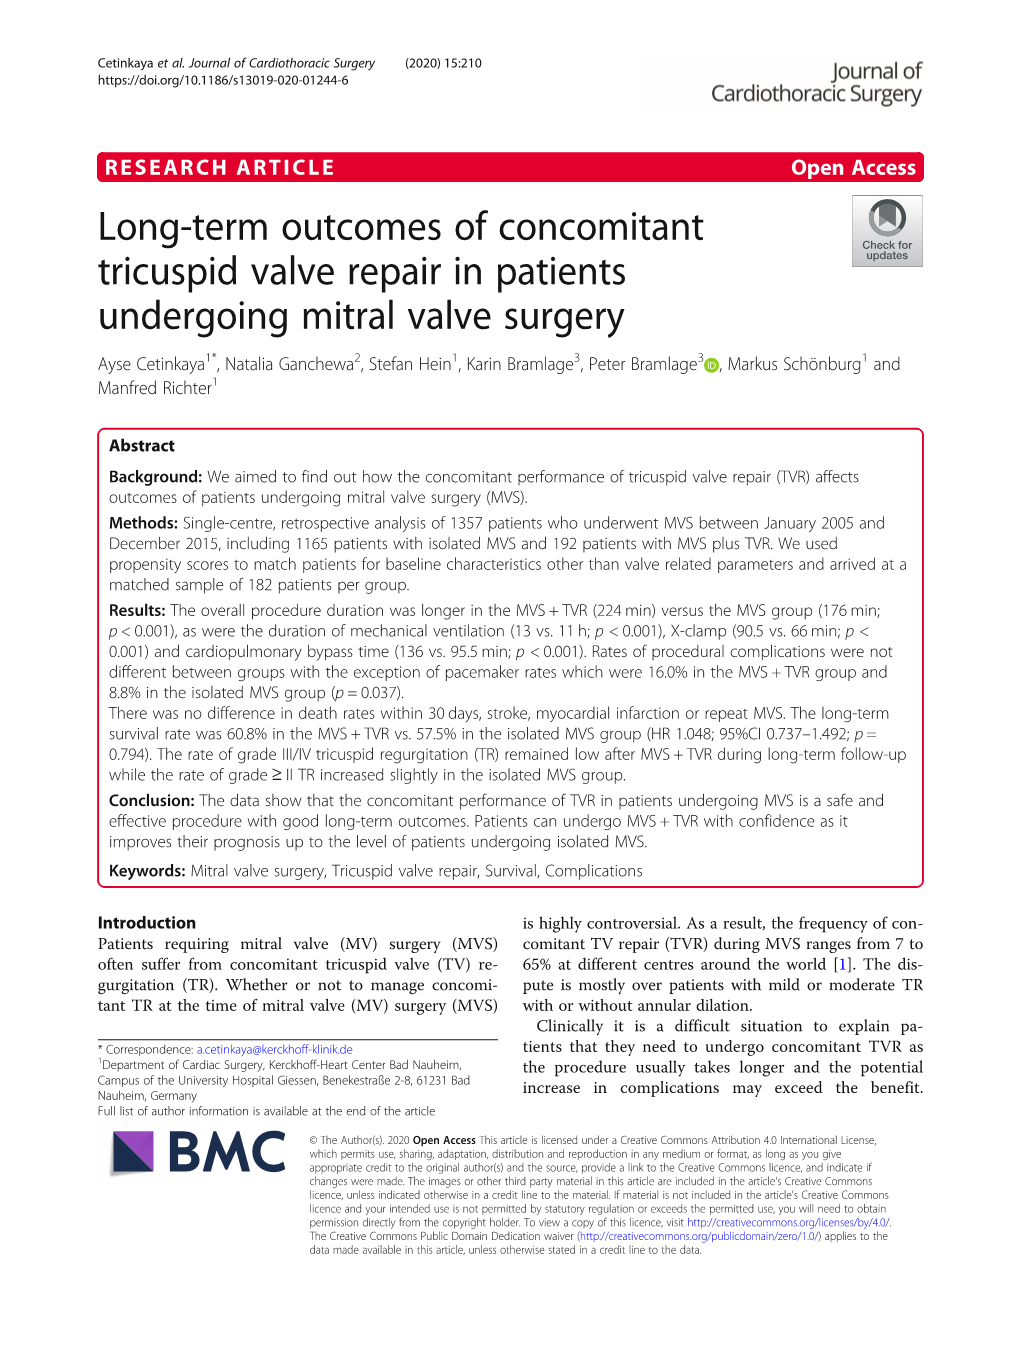 Long-Term Outcomes of Concomitant Tricuspid Valve Repair in Patients